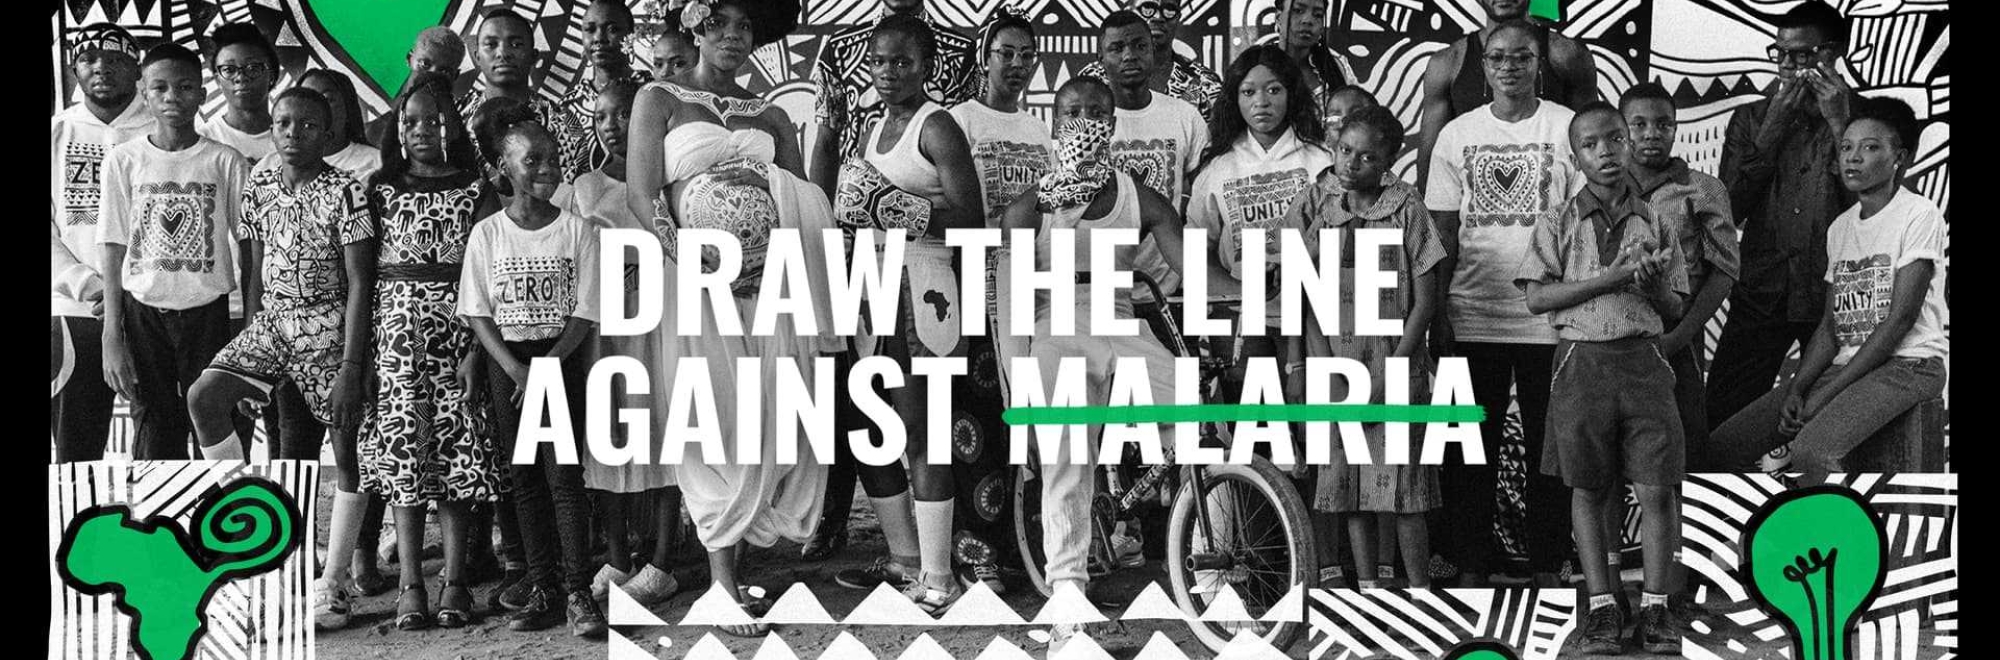 dentsu international partners with Malaria No More UK to ‘Draw the Line Against Malaria’